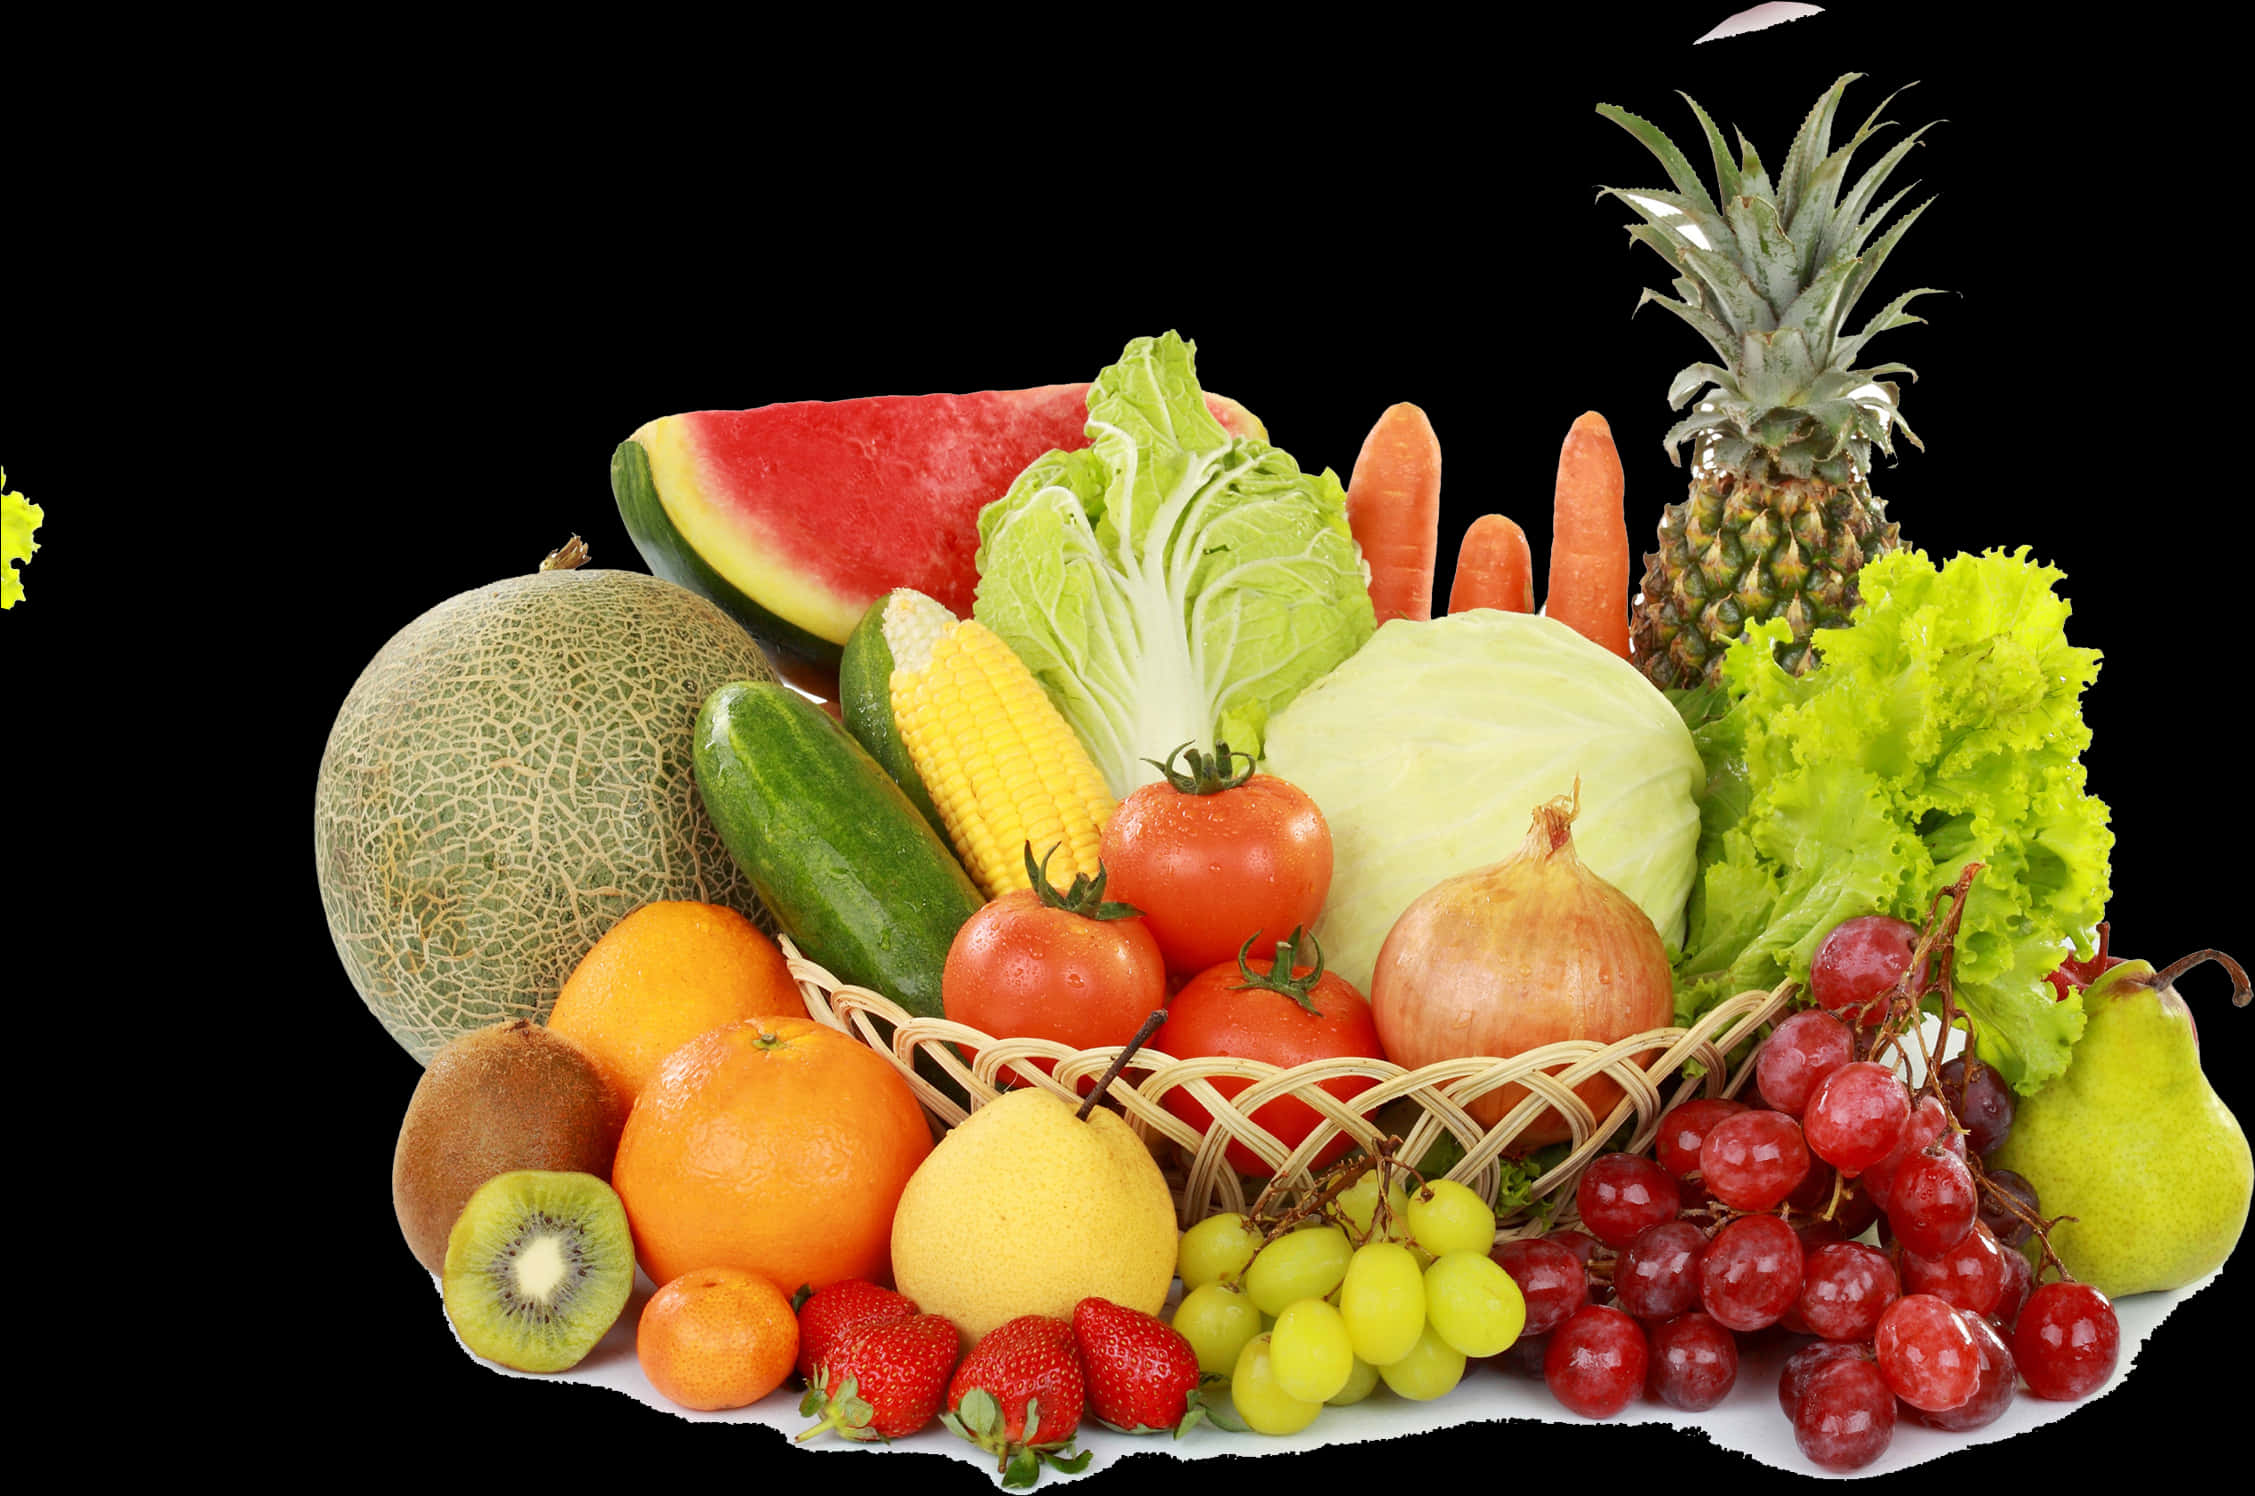 A Basket Of Fruit And Vegetables